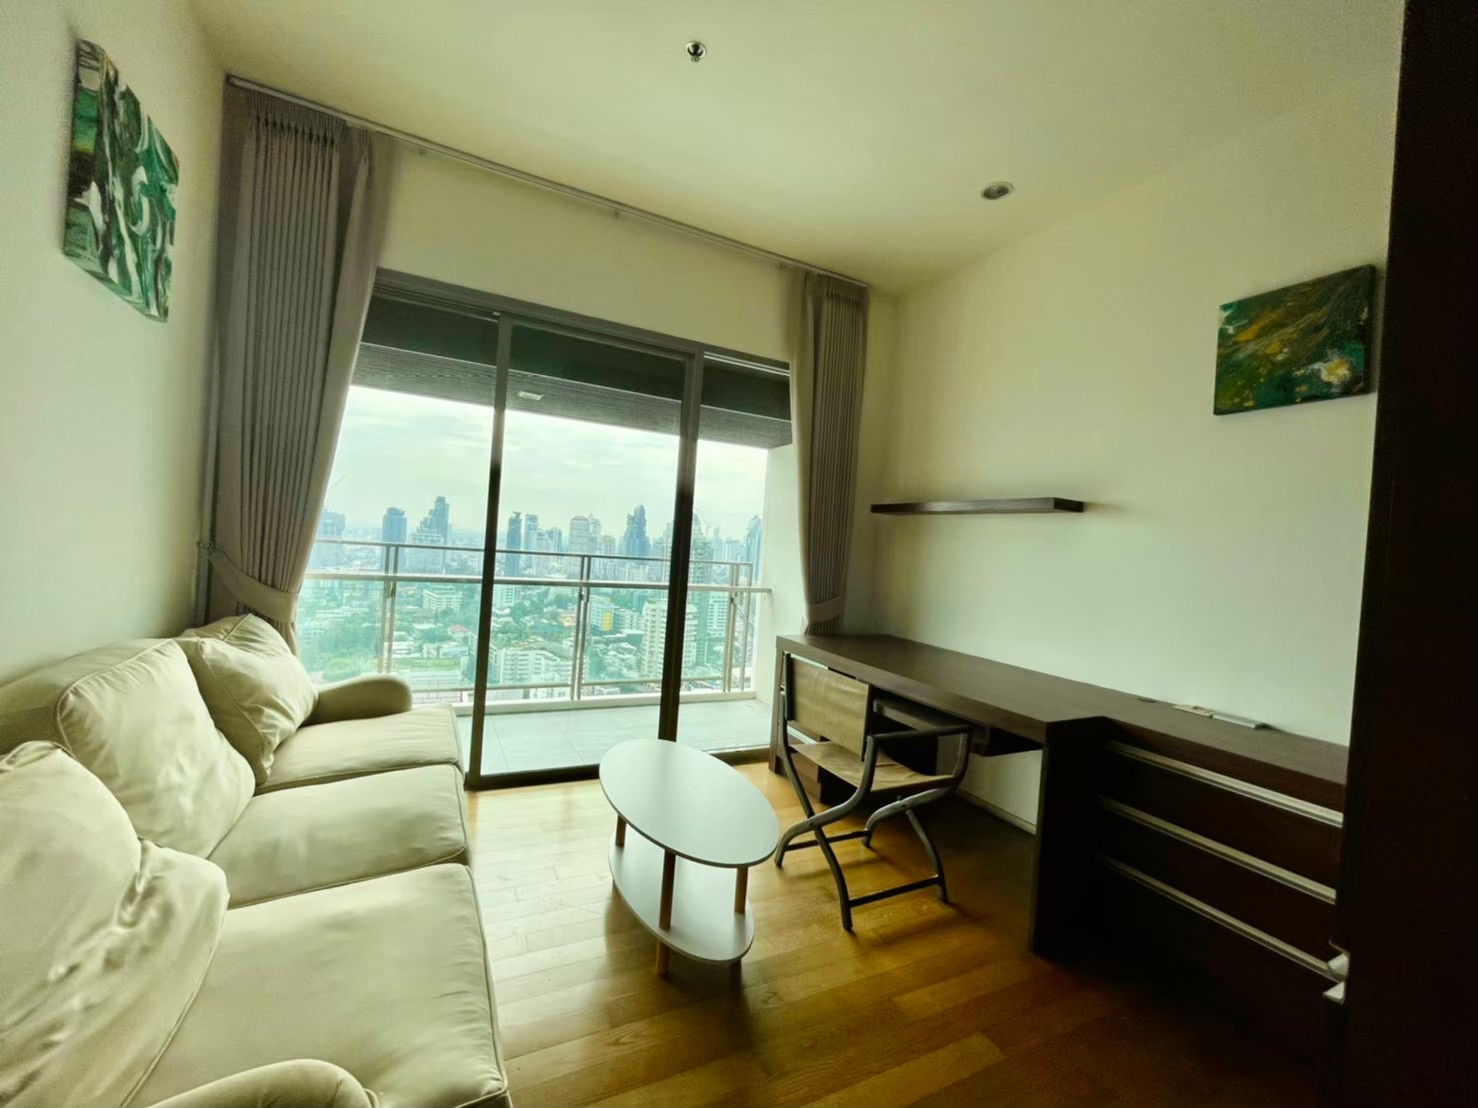 3 Bedrooms, 3 Bathrooms + 1 study room 185 sqm size at The Madison For Rent 110K THB